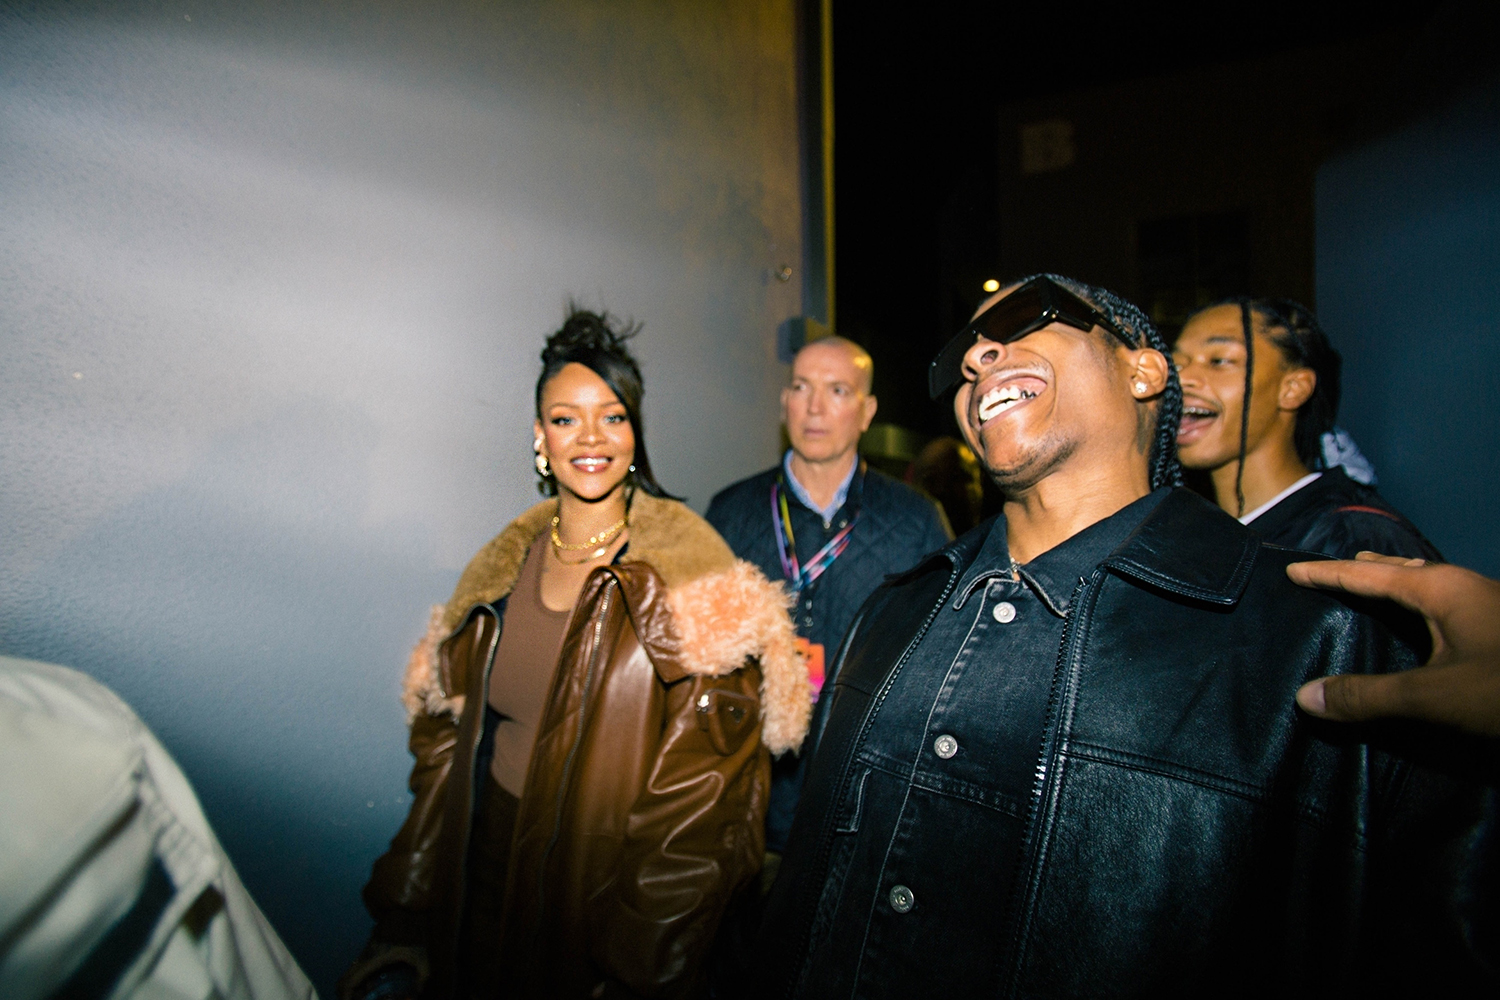 12.8 – AMAZON MUSIC: ASAP ROCKY’S CONCERT AT RED STUDIO, LOS ANGELES